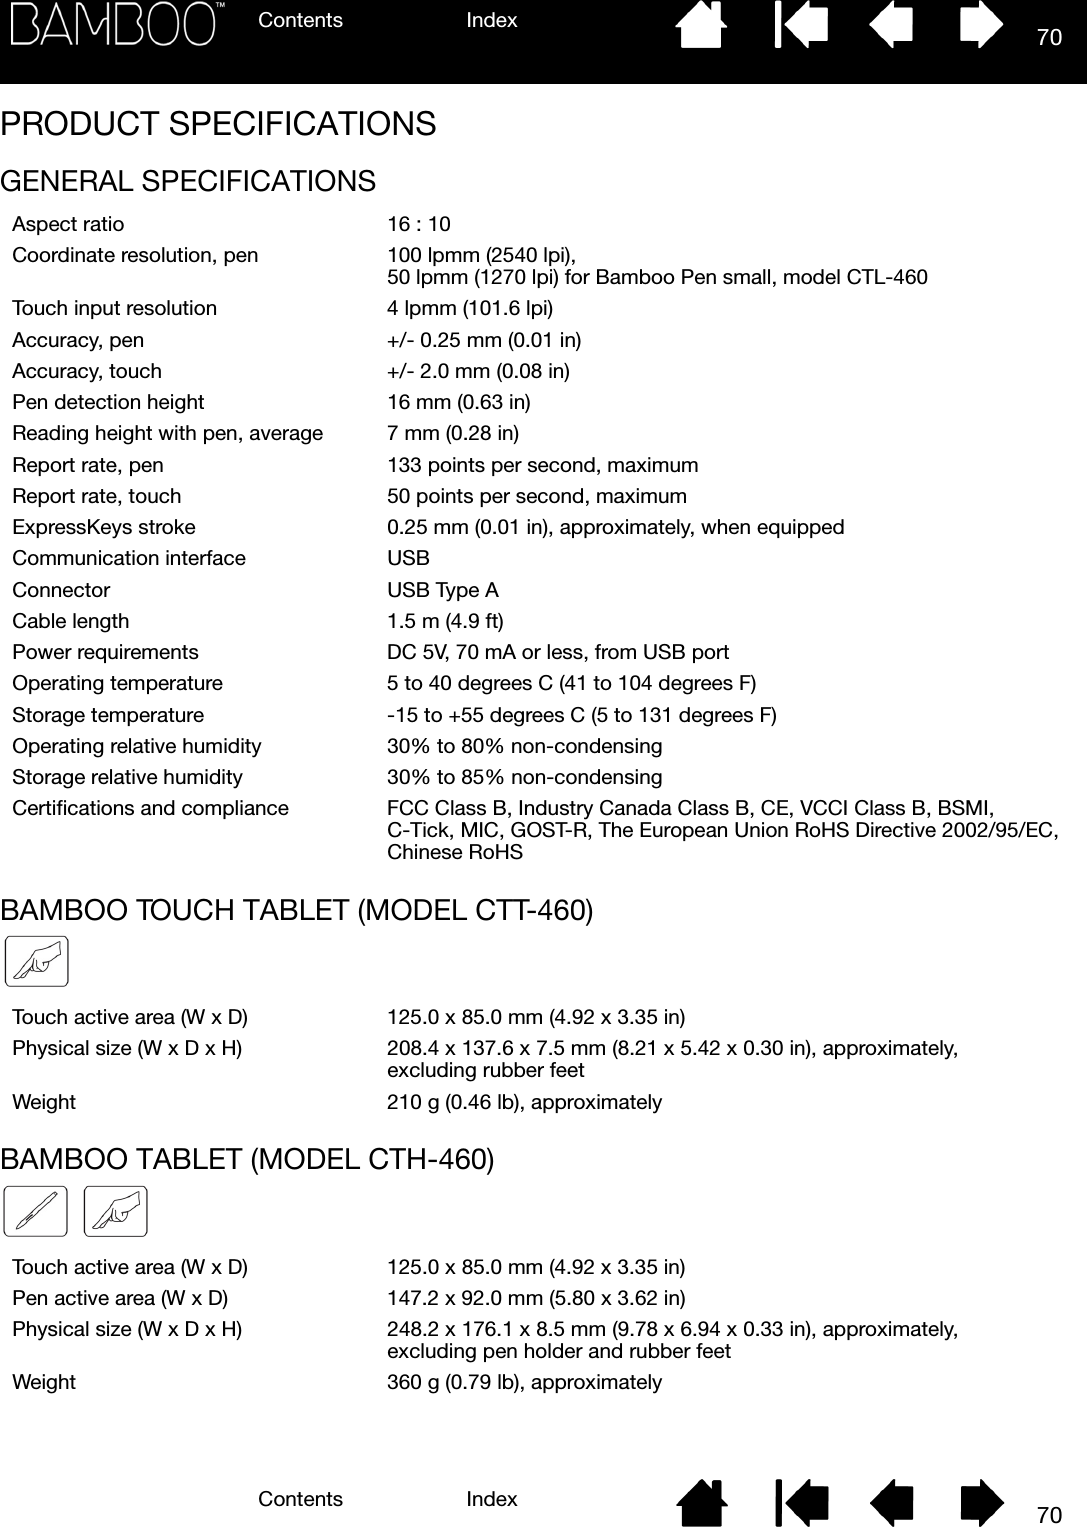 Contents IndexContents 70Index70PRODUCT SPECIFICATIONSGENERAL SPECIFICATIONSBAMBOO TOUCH TABLET (MODEL CTT-460)BAMBOO TABLET (MODEL CTH-460)Aspect ratio 16 : 10Coordinate resolution, pen 100 lpmm (2540 lpi),50 lpmm (1270 lpi) for Bamboo Pen small, model CTL-460Touch input resolution 4 lpmm (101.6 lpi)Accuracy, pen +/- 0.25 mm (0.01 in)Accuracy, touch +/- 2.0 mm (0.08 in)Pen detection height 16 mm (0.63 in)Reading height with pen, average 7 mm (0.28 in)Report rate, pen 133 points per second, maximumReport rate, touch 50 points per second, maximumExpressKeys stroke 0.25 mm (0.01 in), approximately, when equippedCommunication interface USBConnector USB Type ACable length 1.5 m (4.9 ft)Power requirements DC 5V, 70 mA or less, from USB portOperating temperature 5 to 40 degrees C (41 to 104 degrees F)Storage temperature -15 to +55 degrees C (5 to 131 degrees F)Operating relative humidity 30% to 80% non-condensingStorage relative humidity 30% to 85% non-condensingCertifications and compliance FCC Class B, Industry Canada Class B, CE, VCCI Class B, BSMI, C-Tick, MIC, GOST-R, The European Union RoHS Directive 2002/95/EC, Chinese RoHSTouch active area (W x D) 125.0 x 85.0 mm (4.92 x 3.35 in)Physical size (W x D x H) 208.4 x 137.6 x 7.5 mm (8.21 x 5.42 x 0.30 in), approximately, excluding rubber feetWeight 210 g (0.46 lb), approximatelyTouch active area (W x D) 125.0 x 85.0 mm (4.92 x 3.35 in)Pen active area (W x D) 147.2 x 92.0 mm (5.80 x 3.62 in)Physical size (W x D x H) 248.2 x 176.1 x 8.5 mm (9.78 x 6.94 x 0.33 in), approximately, excluding pen holder and rubber feetWeight 360 g (0.79 lb), approximately